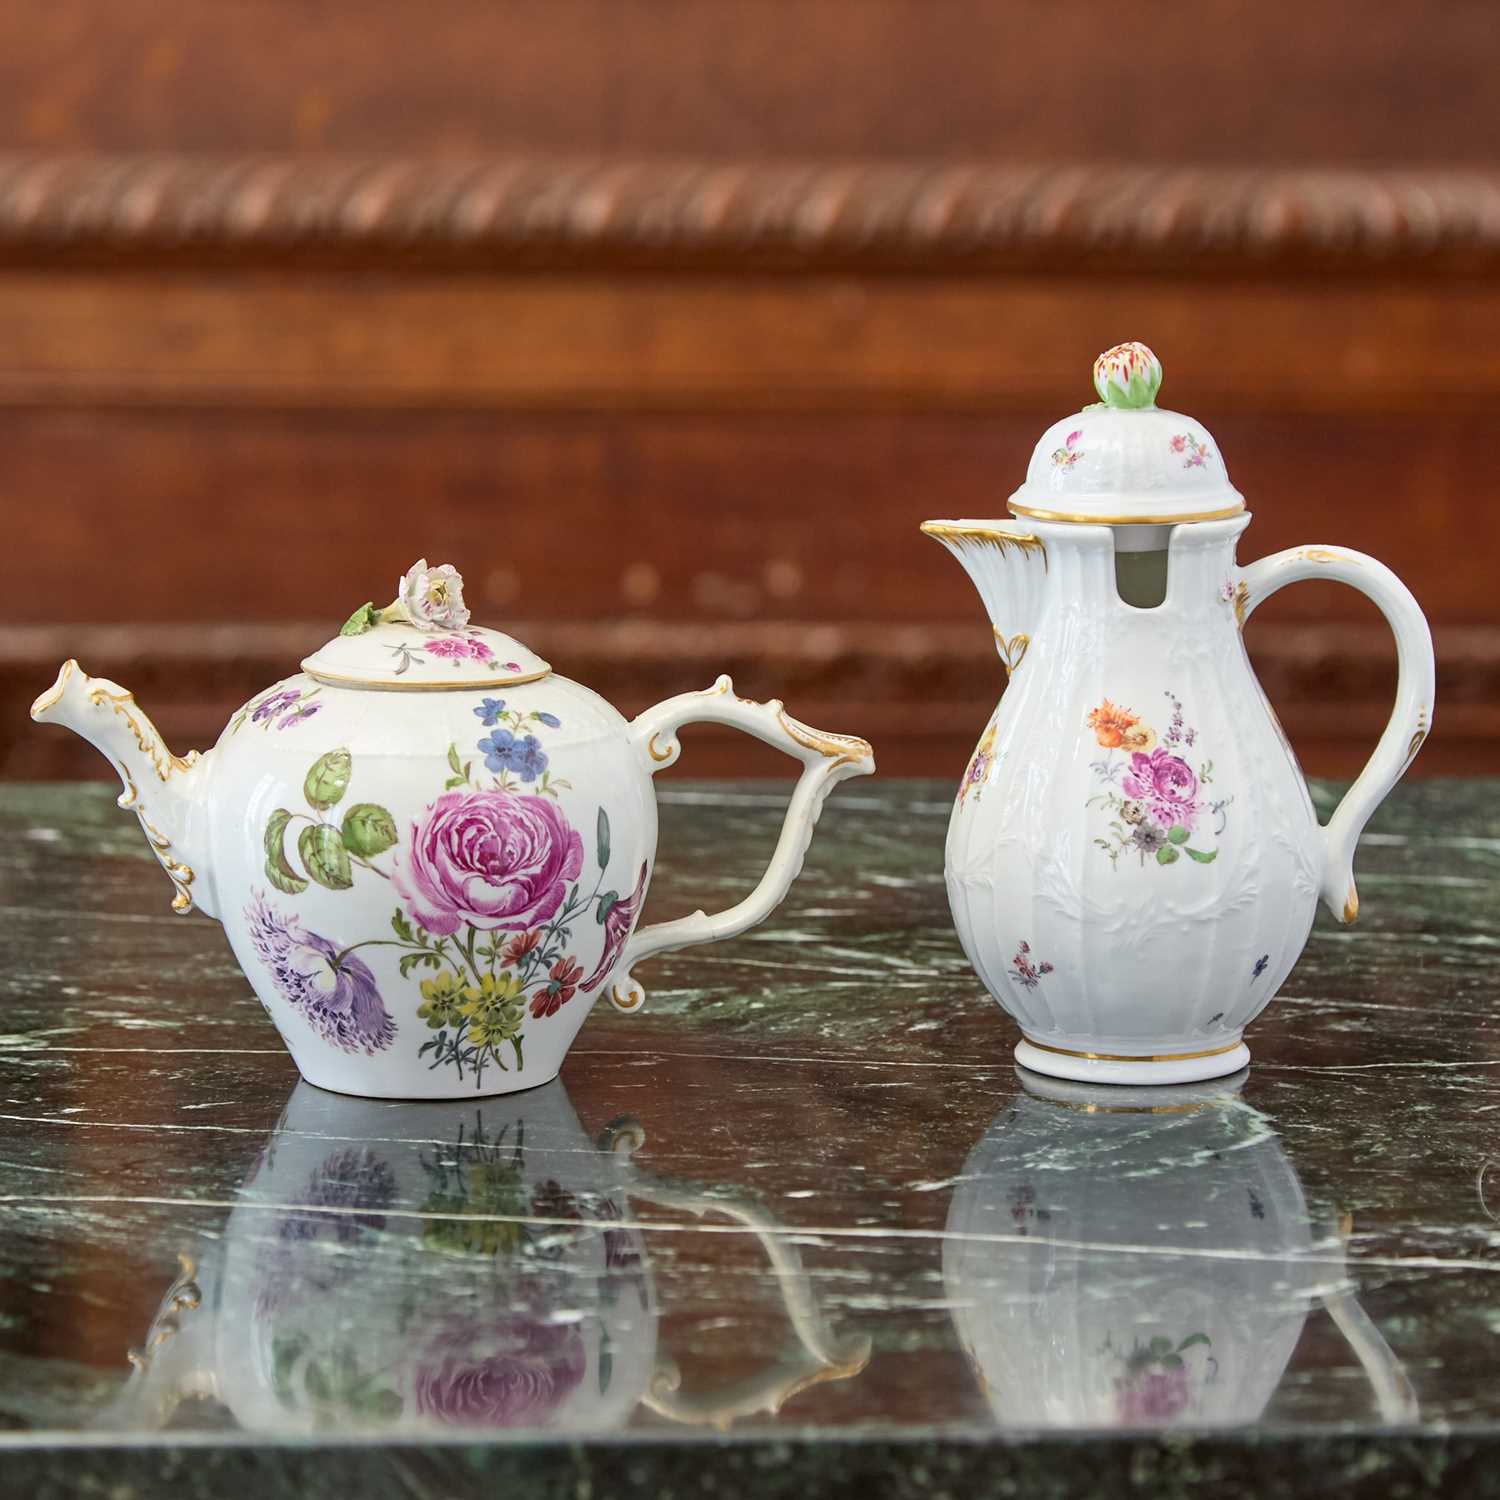 Lot 412 - MEISSEN PORCELAIN TEAPOT AND A COVER AND A JUG AND COVER